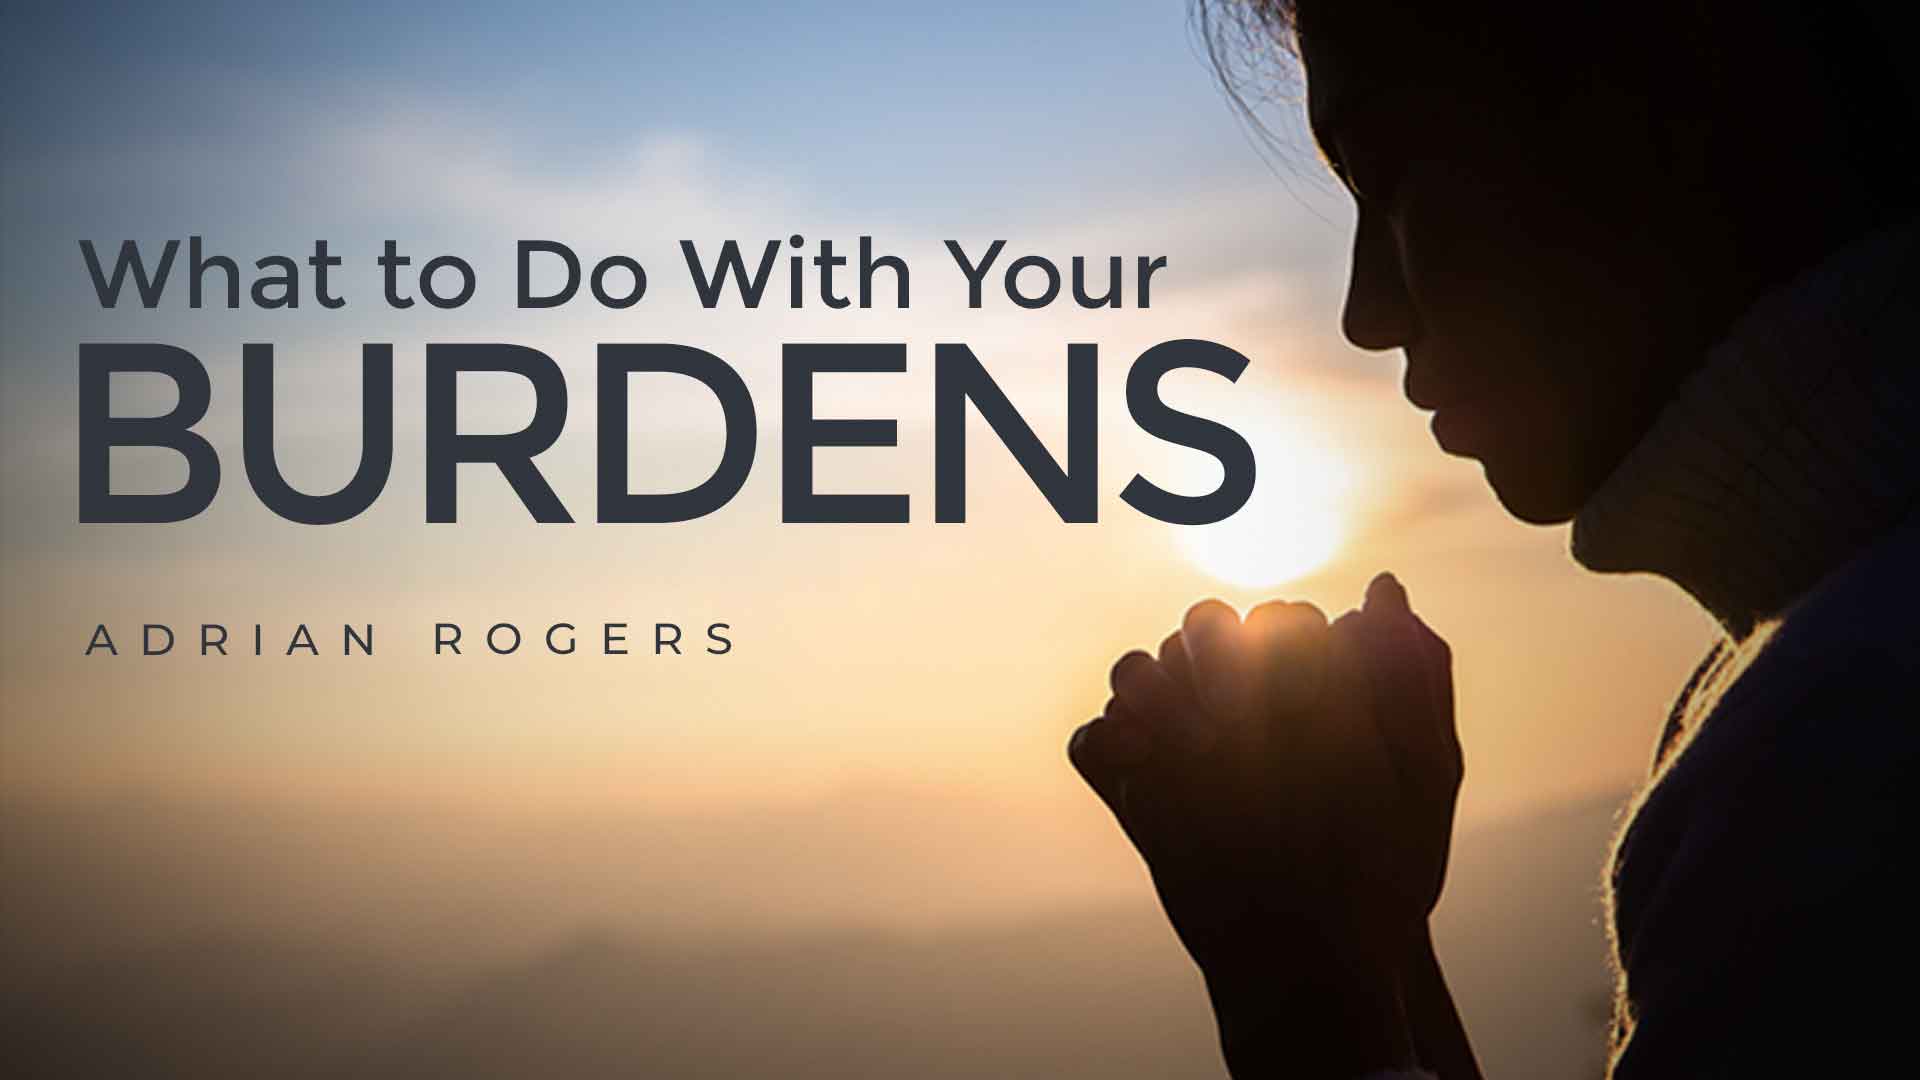 What to Do With Your Burdens 1920x1080